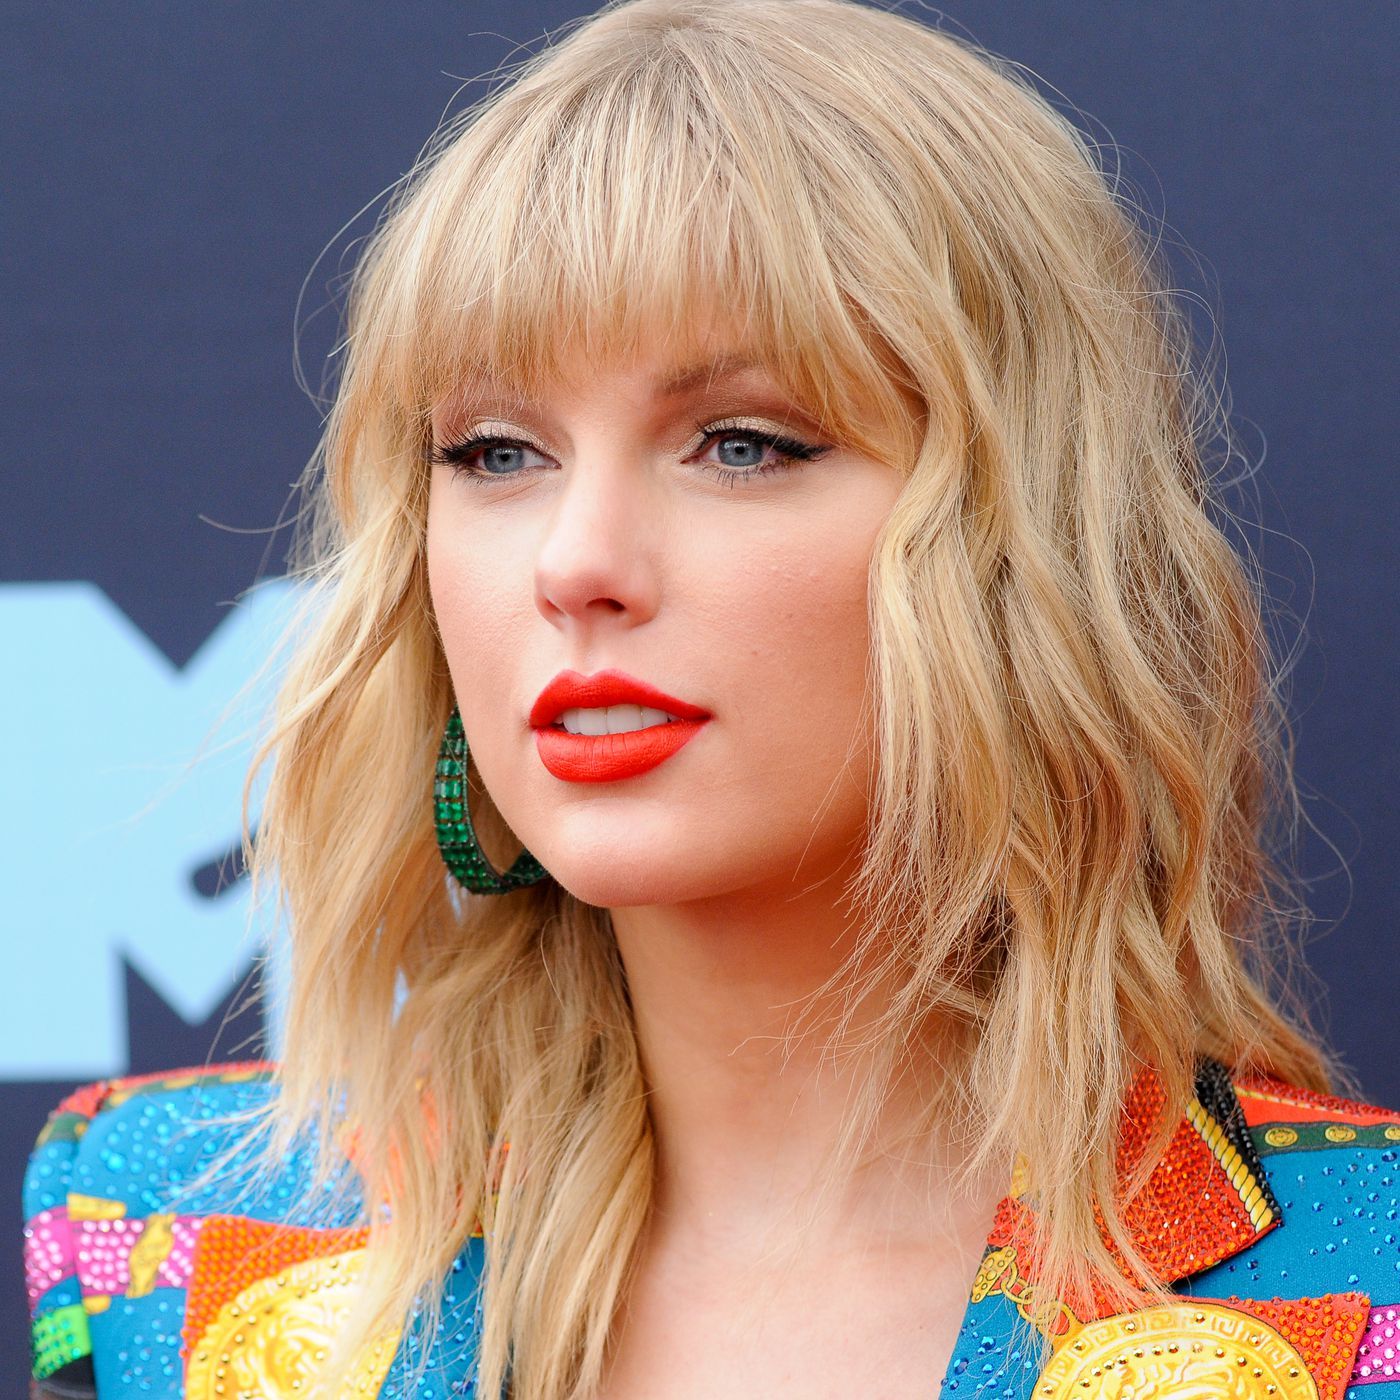 Taylor Swift provoked fans to go after Scooter Braun and now he's being doxxed